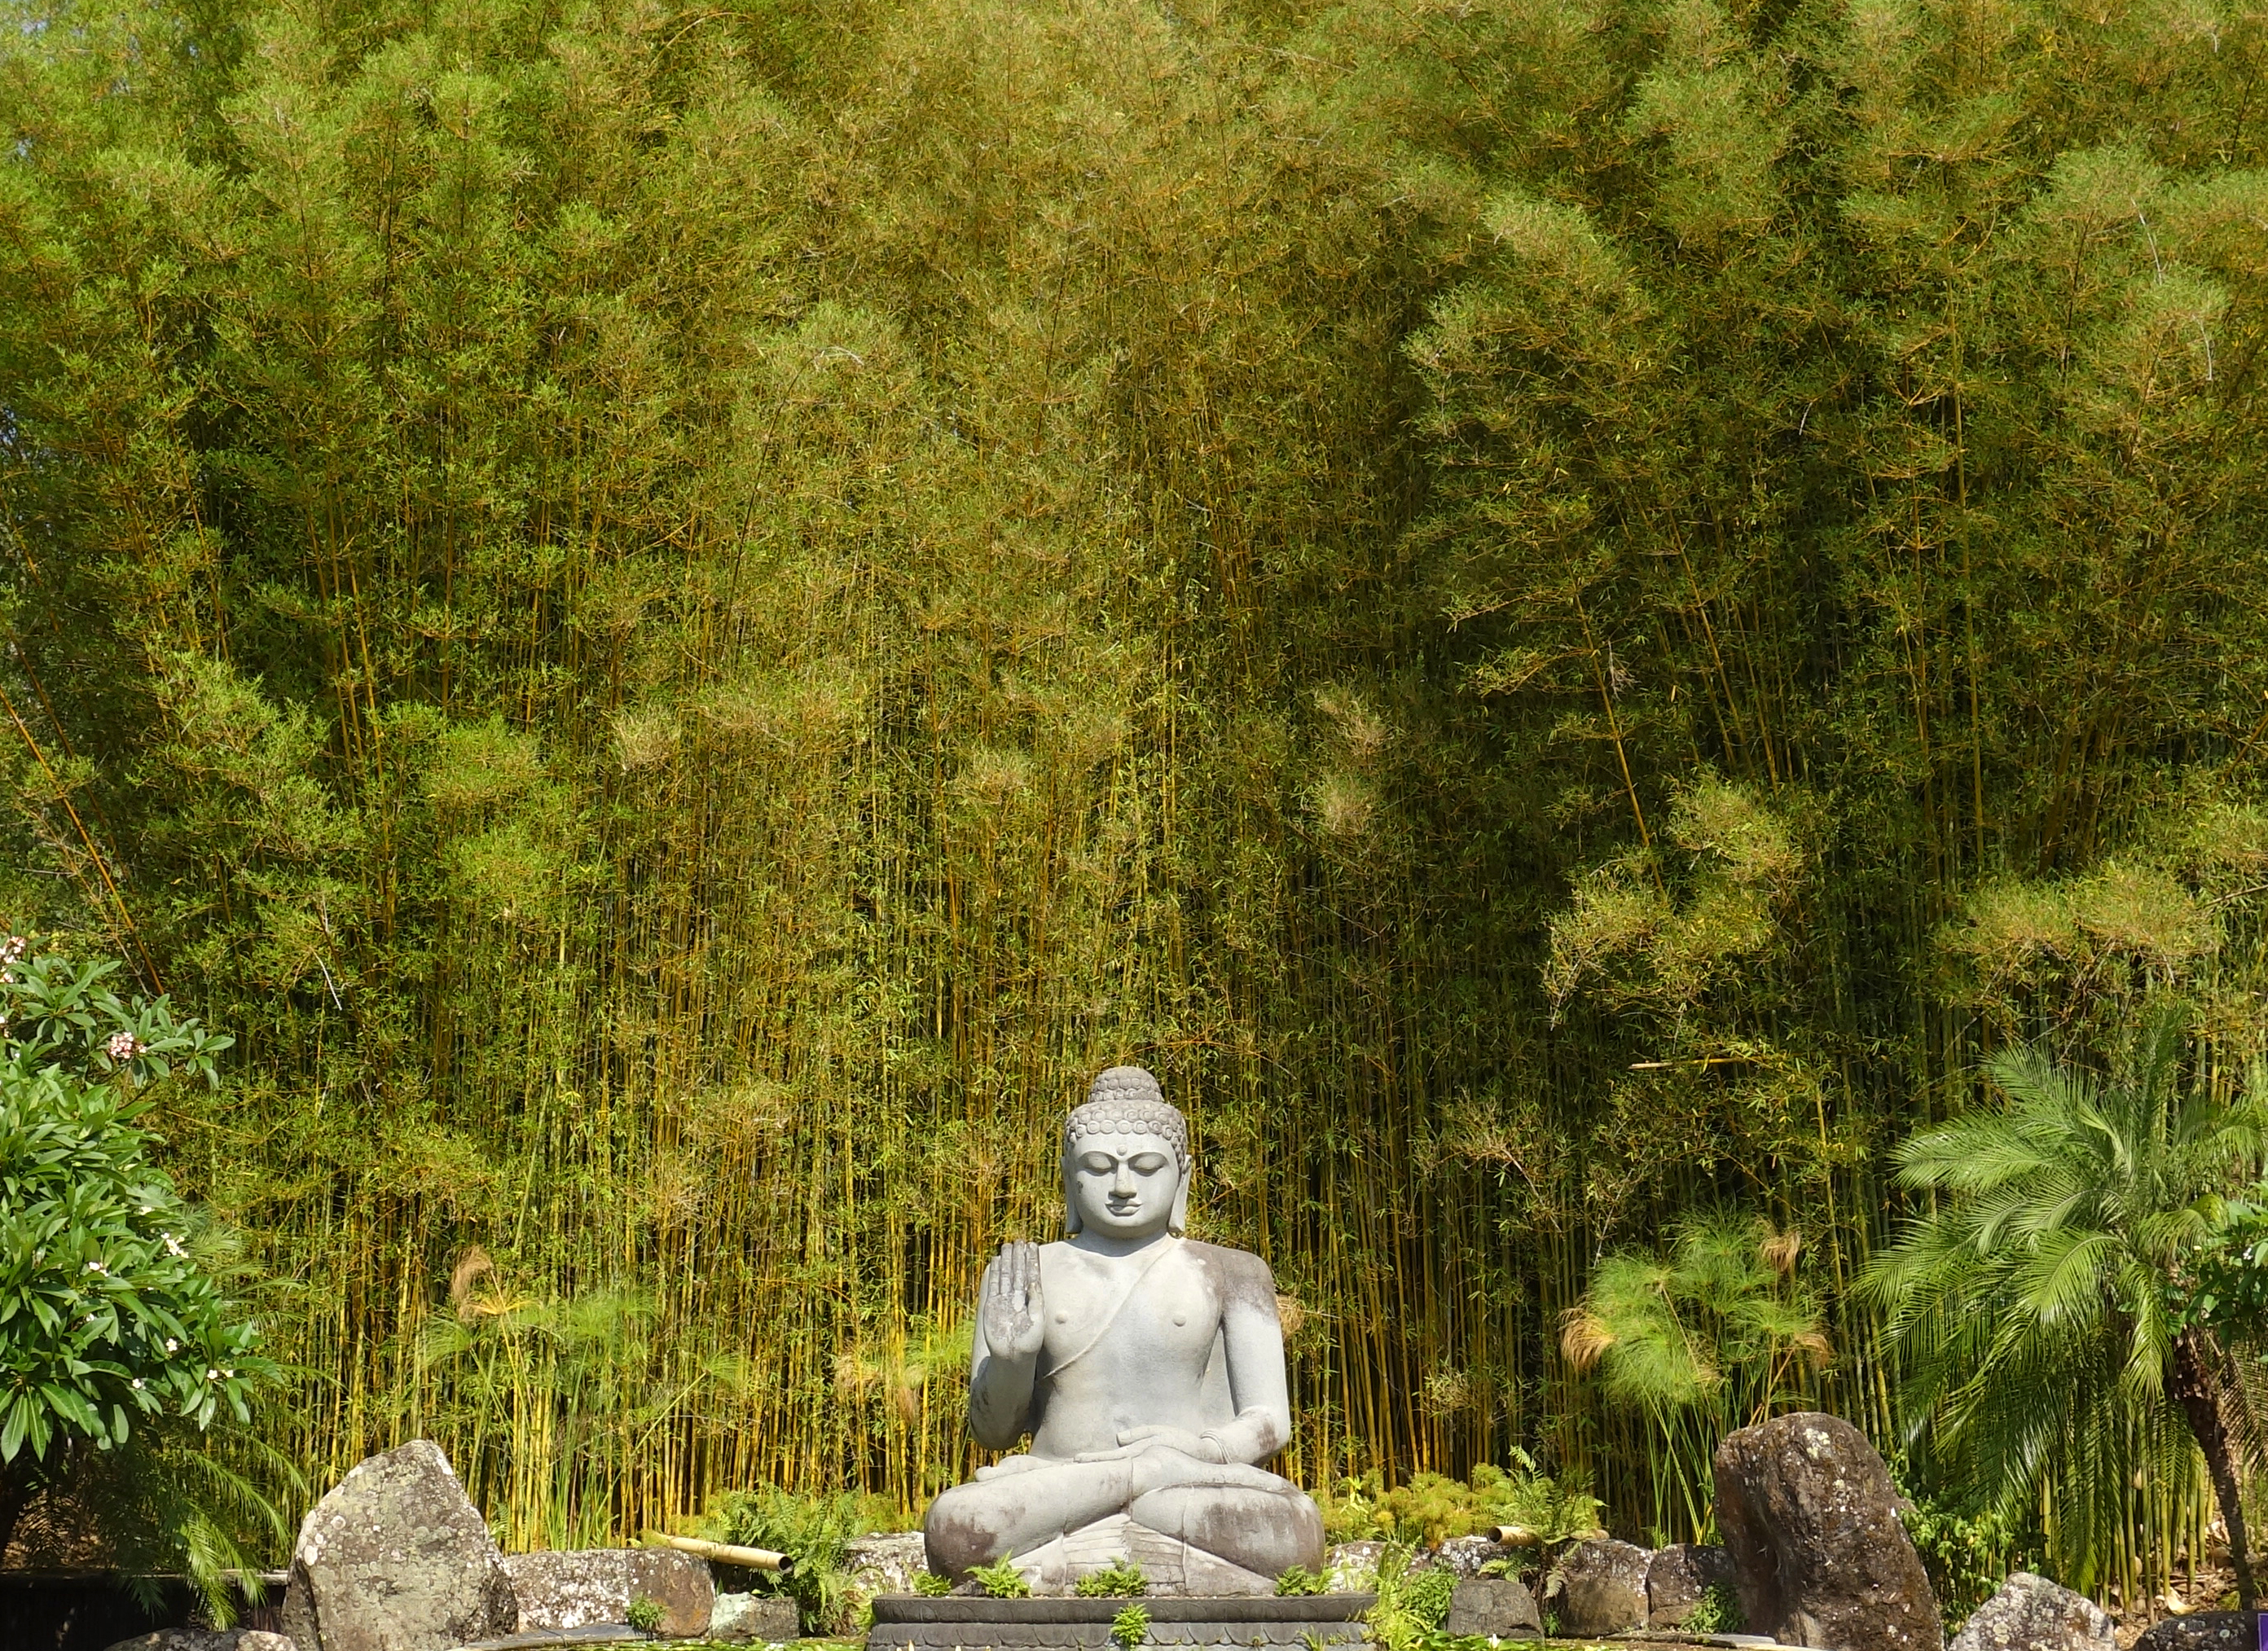 Image Monument Tranquility Statue Green Jungle Relax